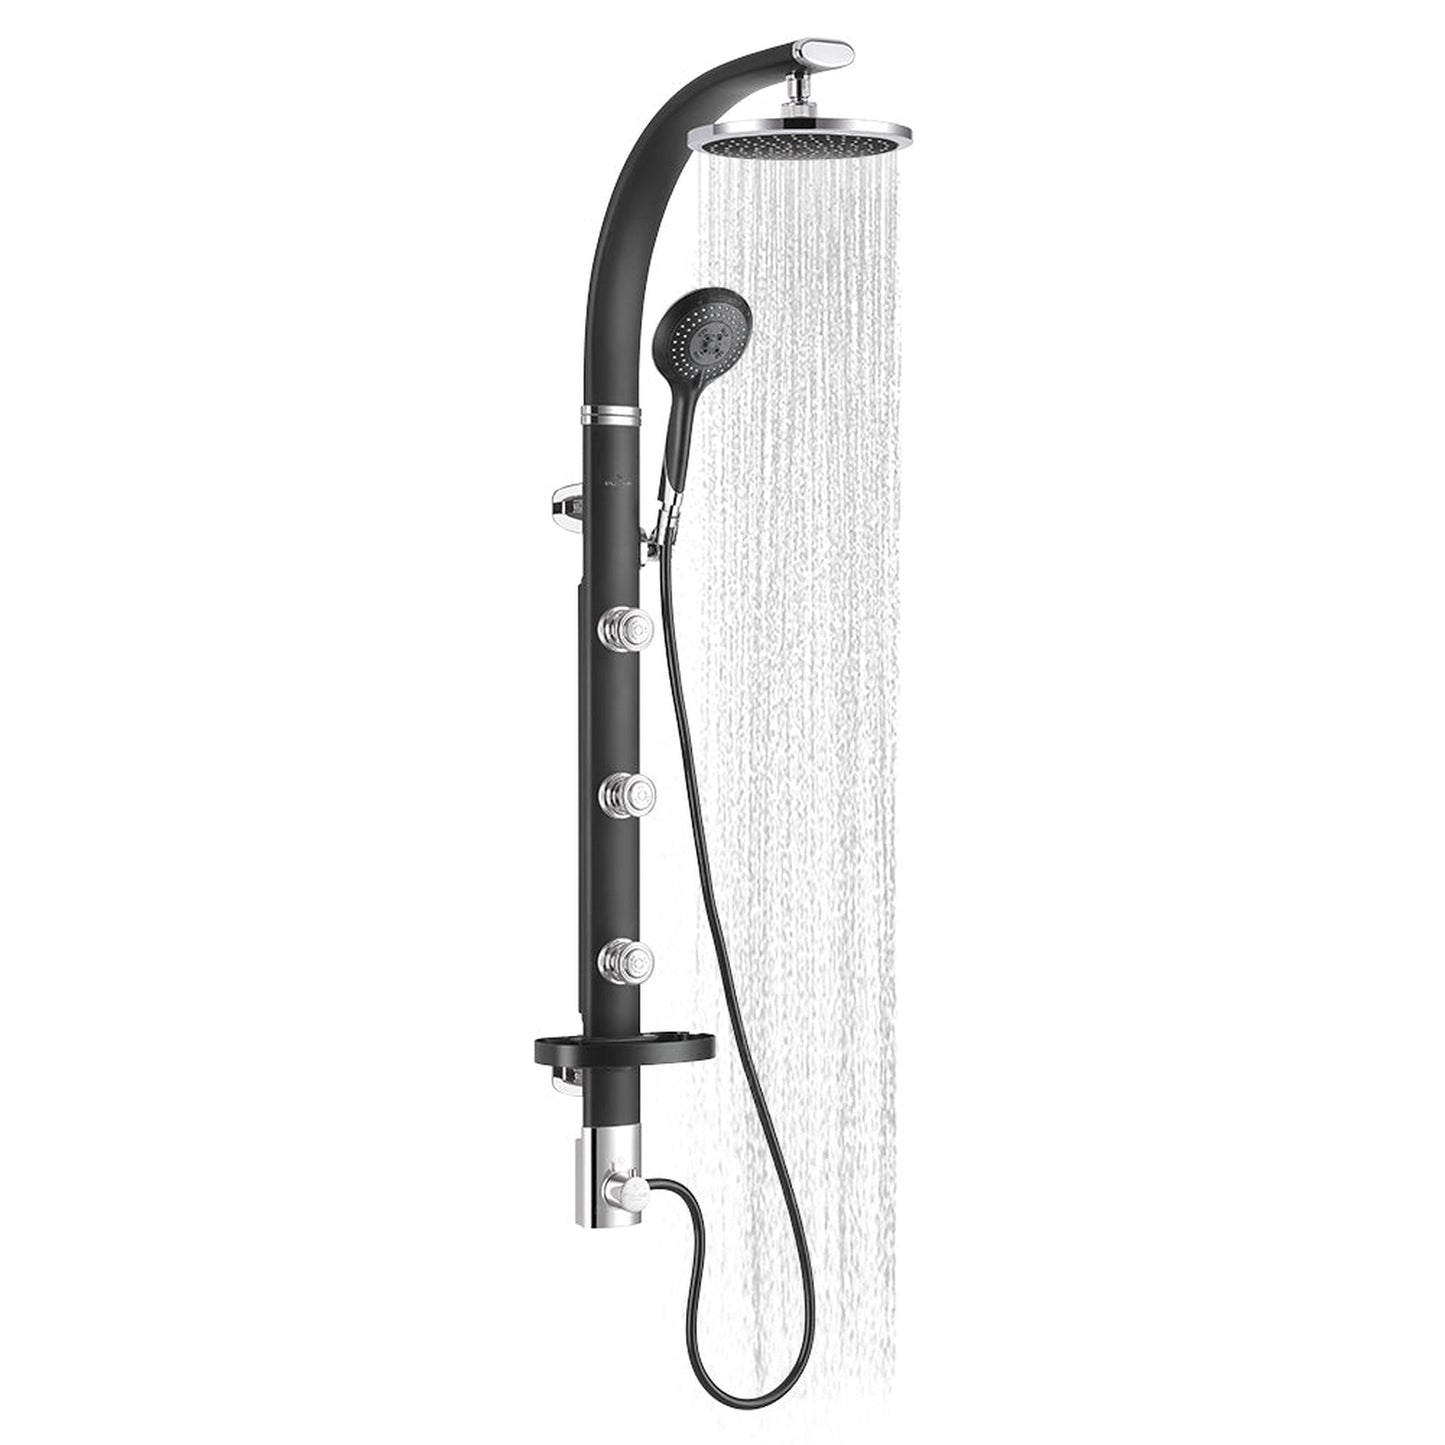 PULSE ShowerSpas Bonzai 2.5 GPM Rain Shower System in Black Aluminum Finish With 3-Body Jet and 5-Function Hand Shower